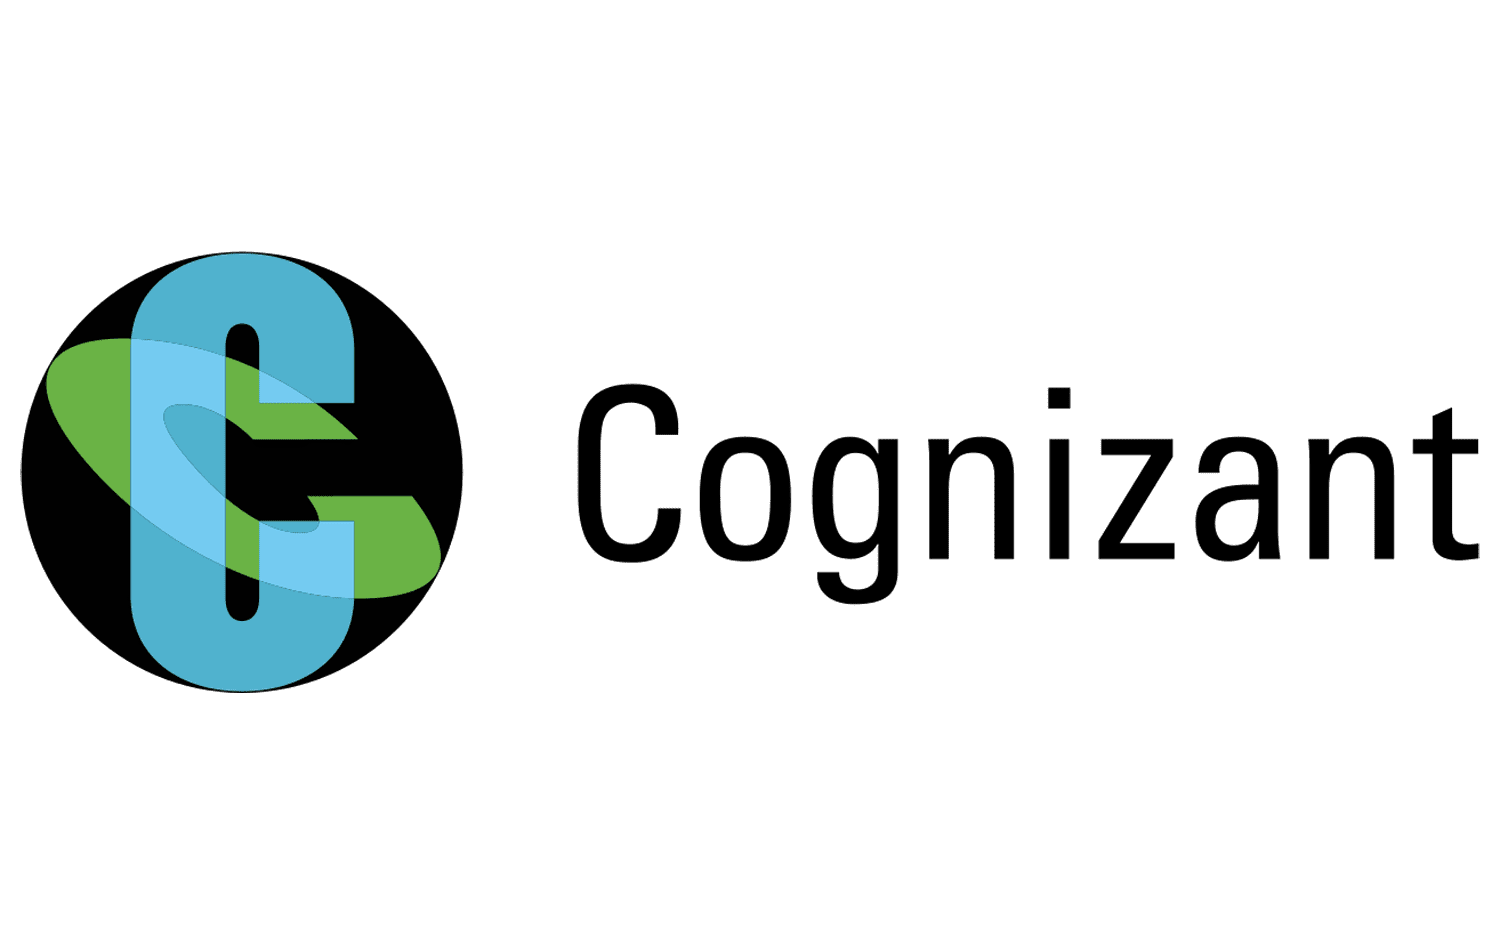 Cognizant images vertical and horizontal in cognizant